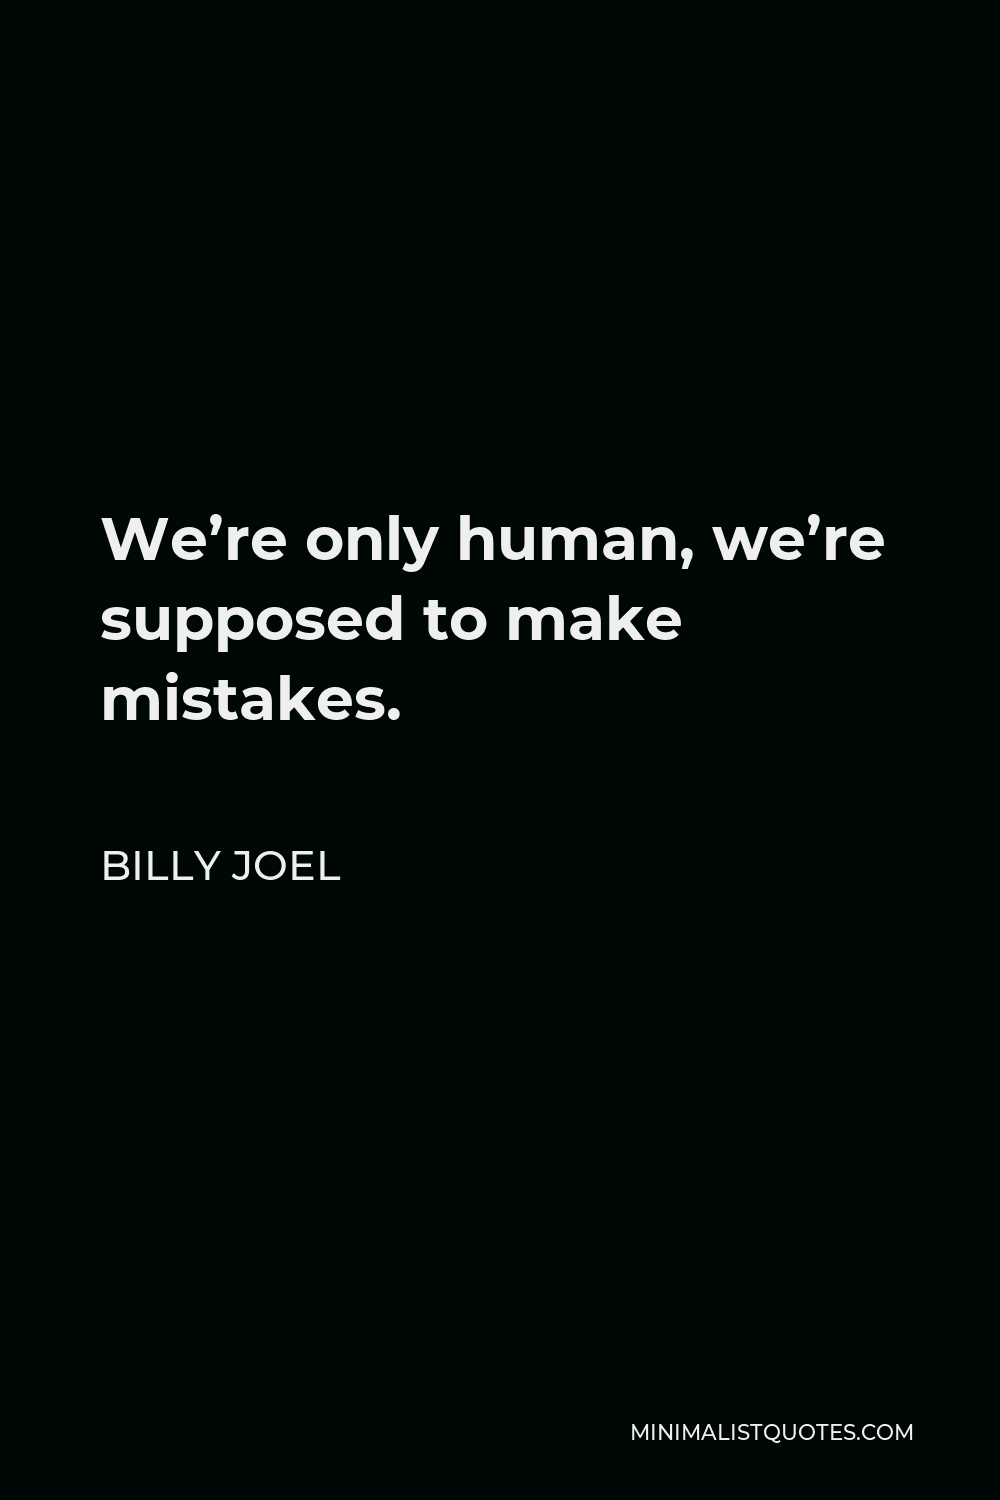 Billy Joel Quote - We’re only human, we’re supposed to make mistakes.